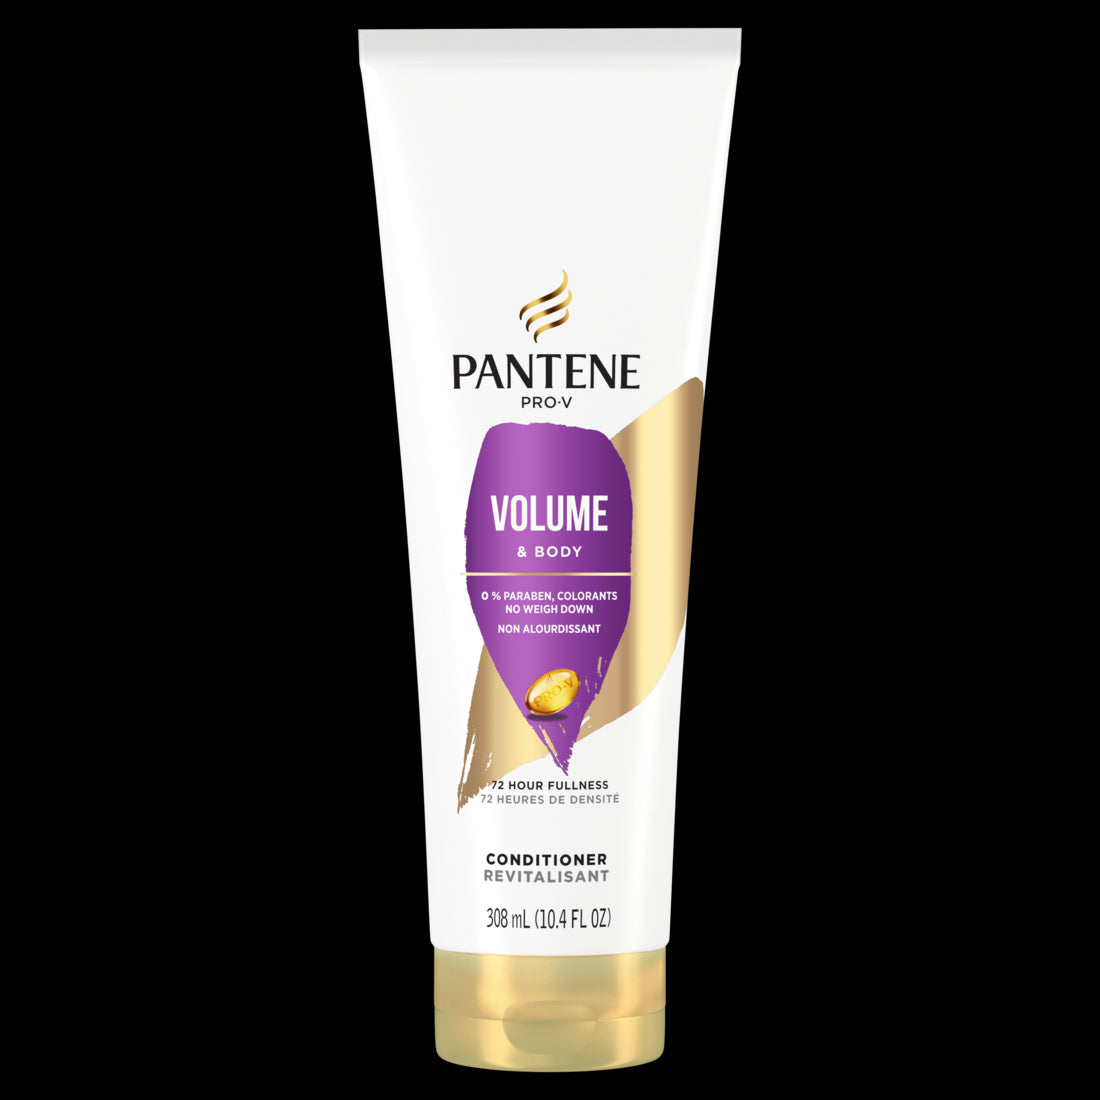 Pantene Conditioner for Fine or Thin Hair Paraben Free - 10.4oz/12pk